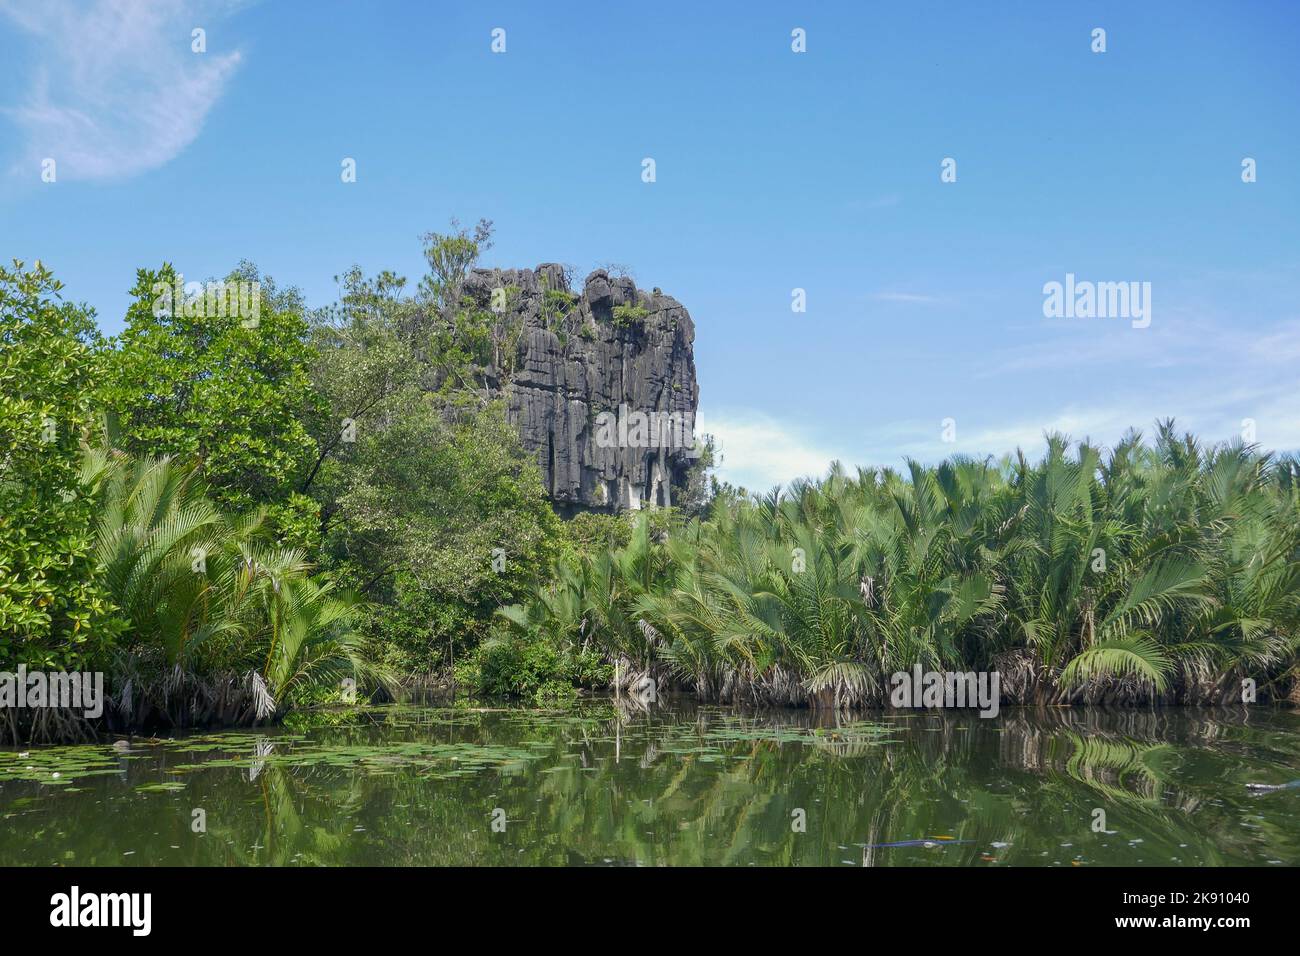 Scenic rural landscape view of tropical Pute river and karst mountain in Rammang-Rammang, South Sulawesi, Indonesia Stock Photo